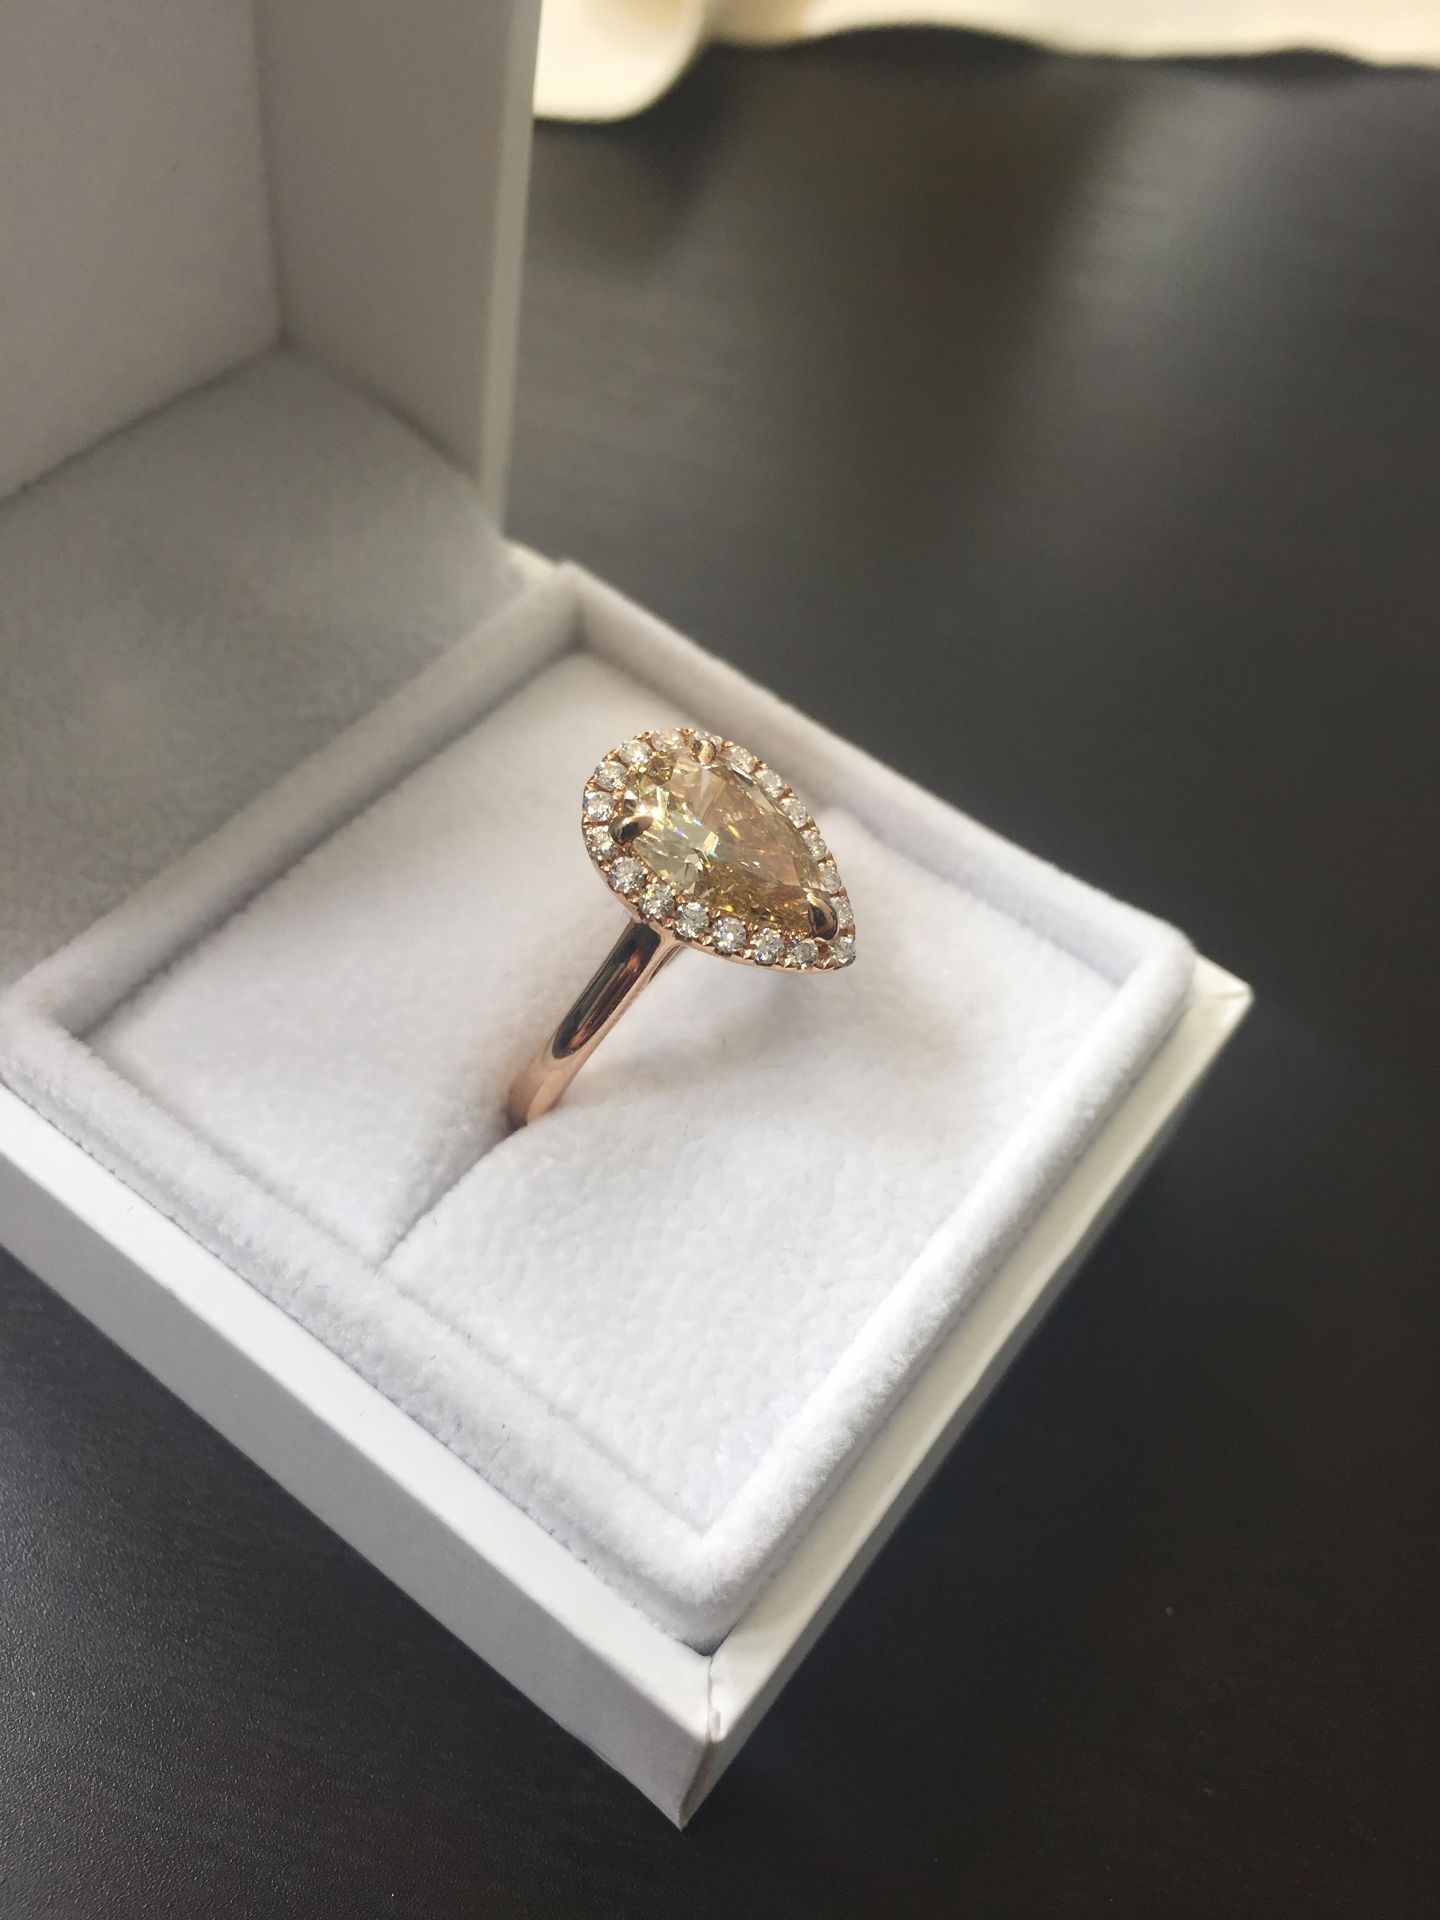 1.47ct pear shaped diamond set ring. Fancy yellow pear diamond, I1 clarity. Set in 18ct rose gold. - Image 6 of 6